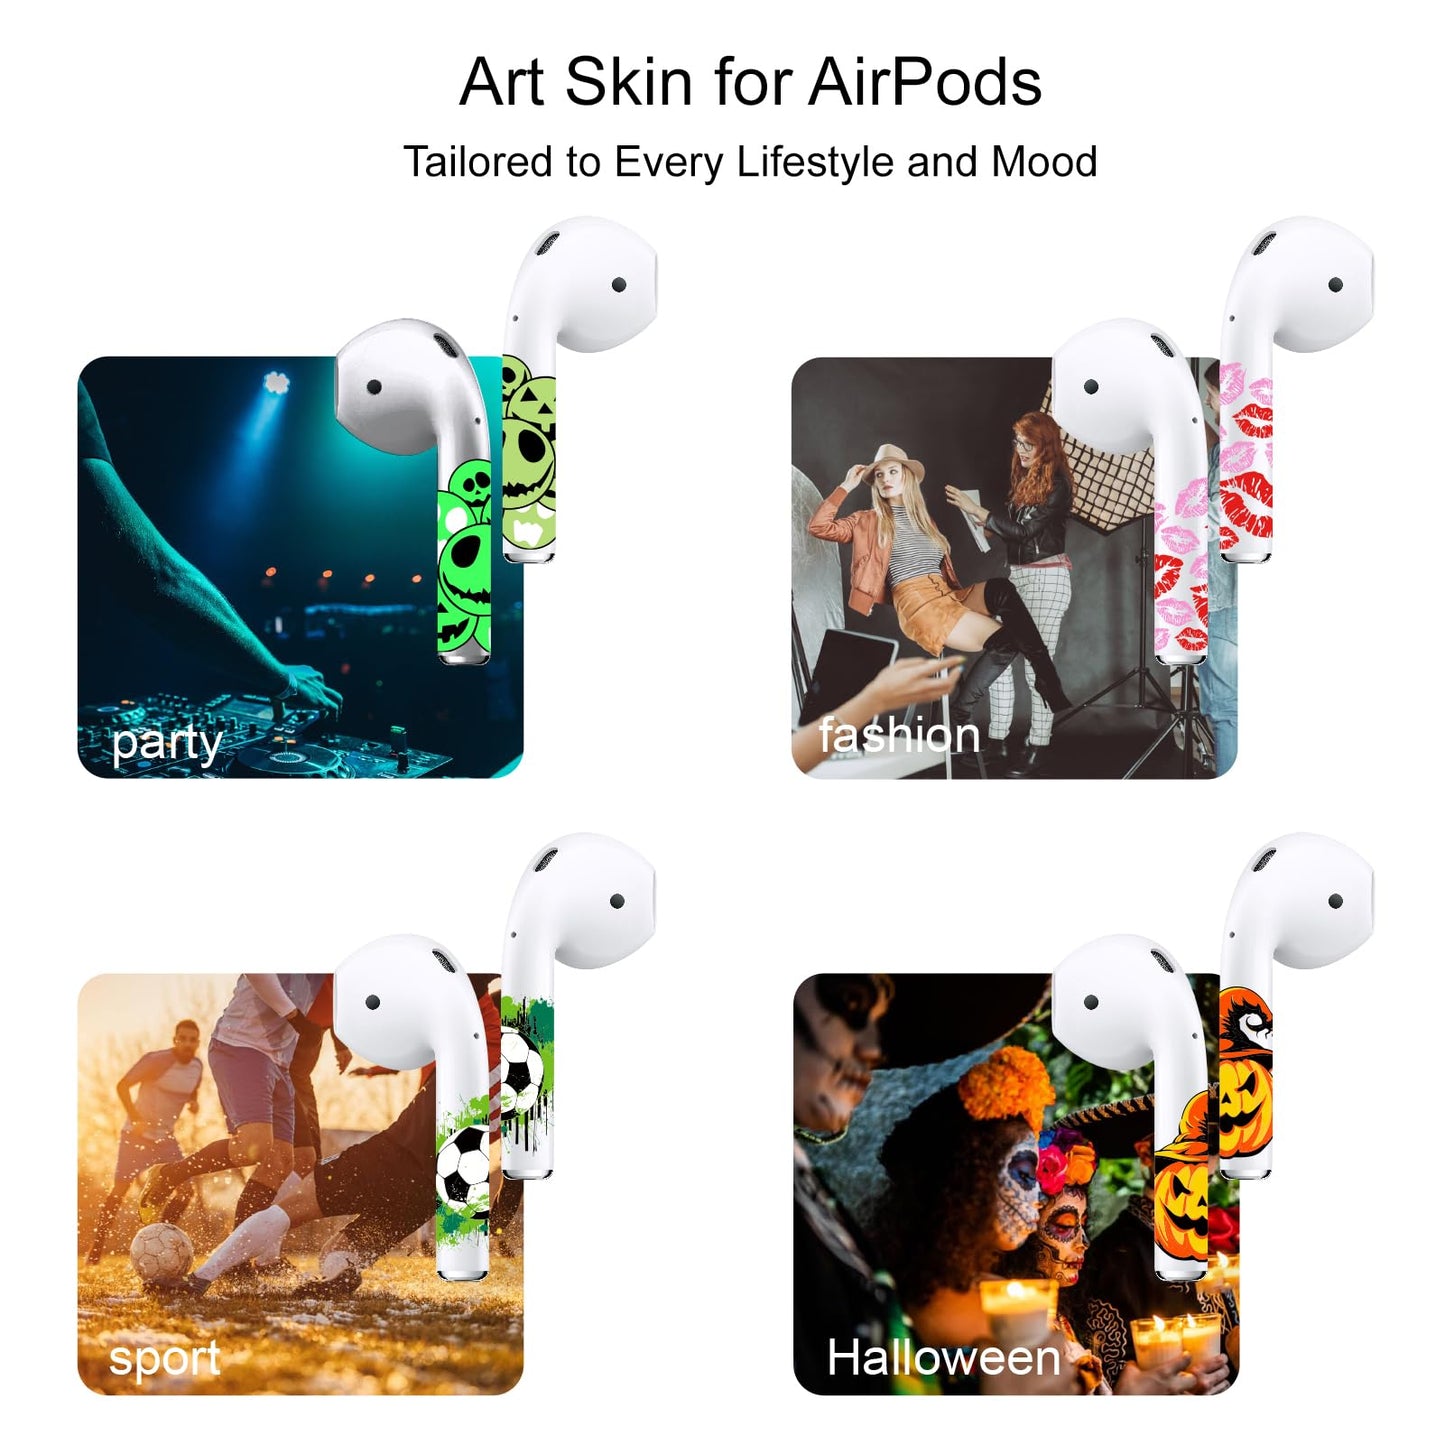 ROCKMAX for AirPods Gen 2 Skin Accessories, Brown Teddy Bear Decor Sticker Wrap for Men, Women, Boys and Girls Gift, Unique Tattoos Compatible to Air Pods 2nd Generation Case Cover